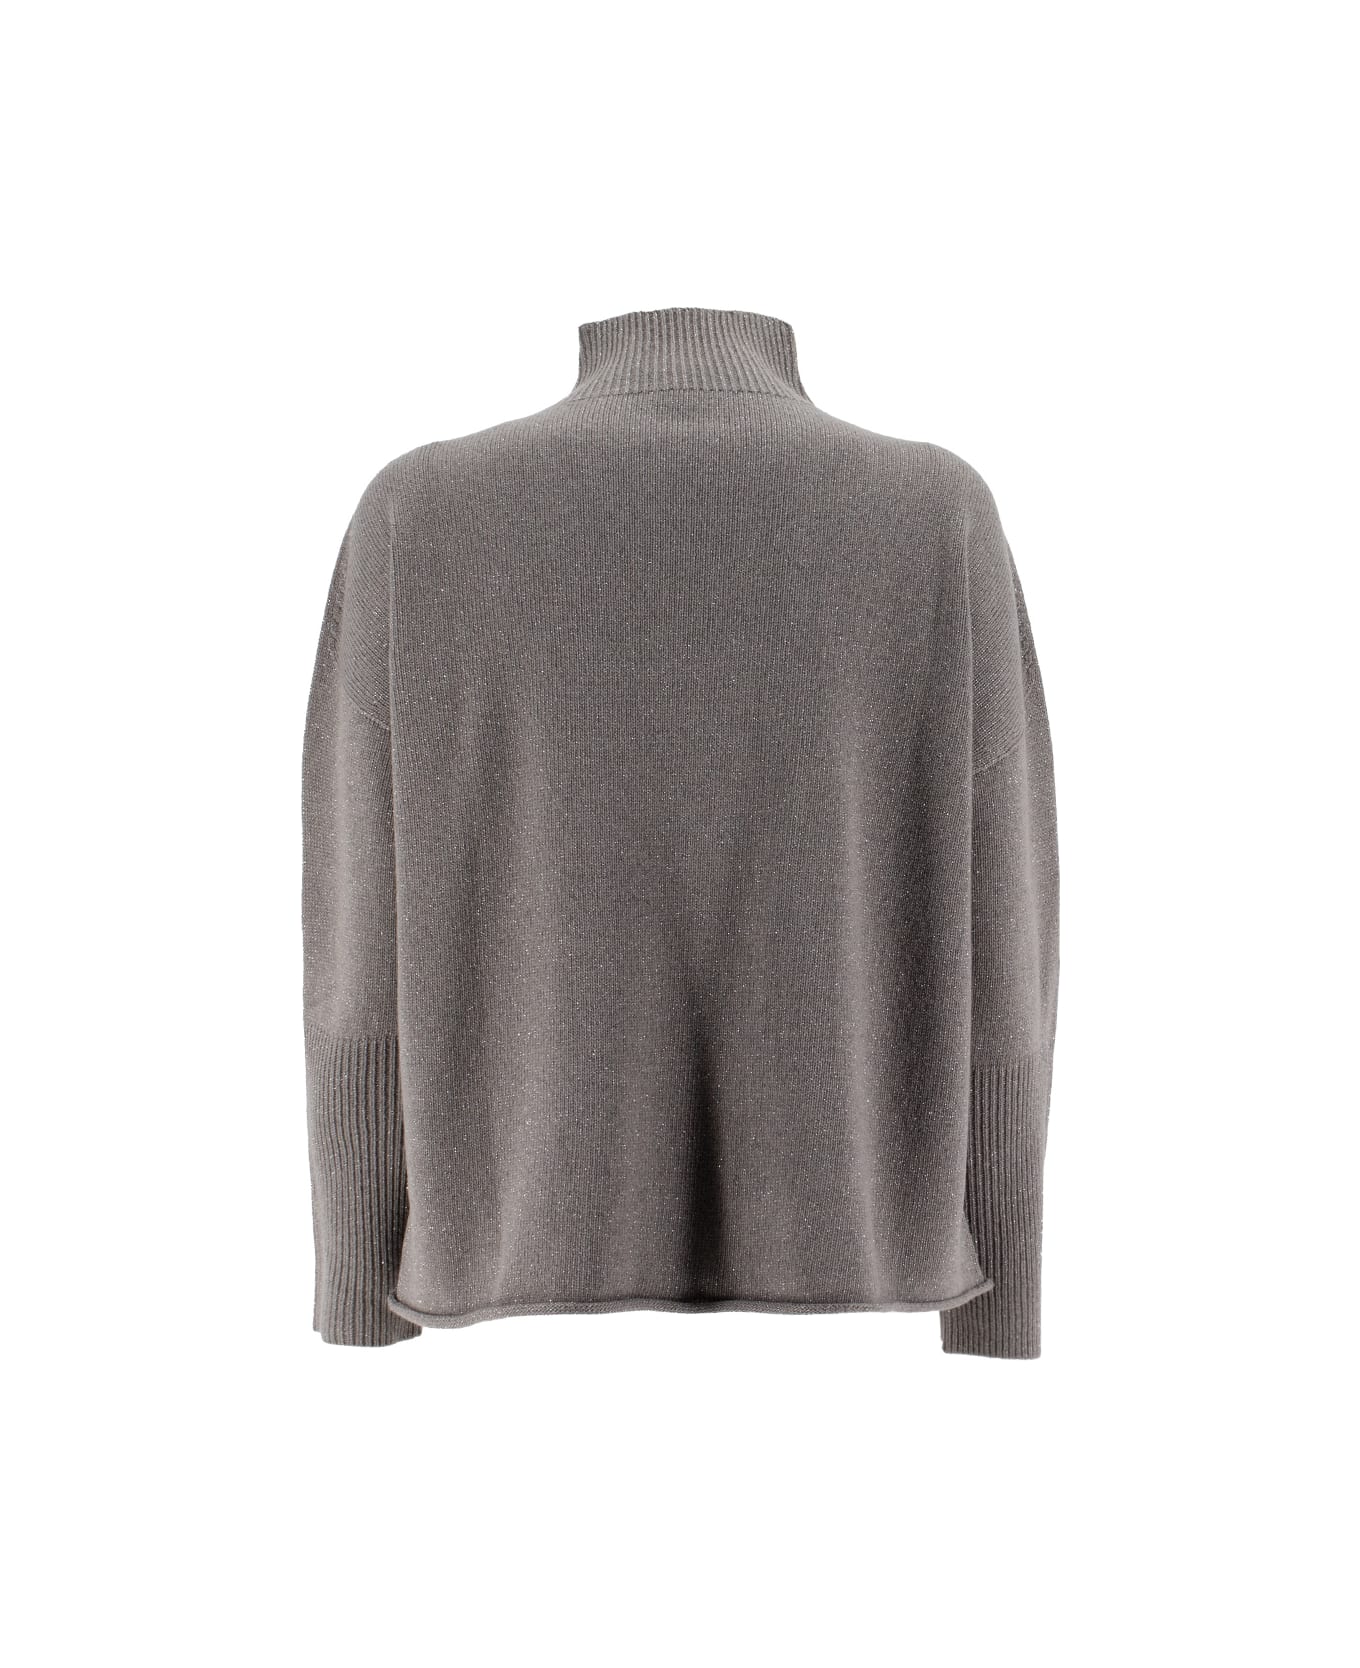 Le Tricot Perugia Sweater - TAUPE/GREY LX ニットウェア